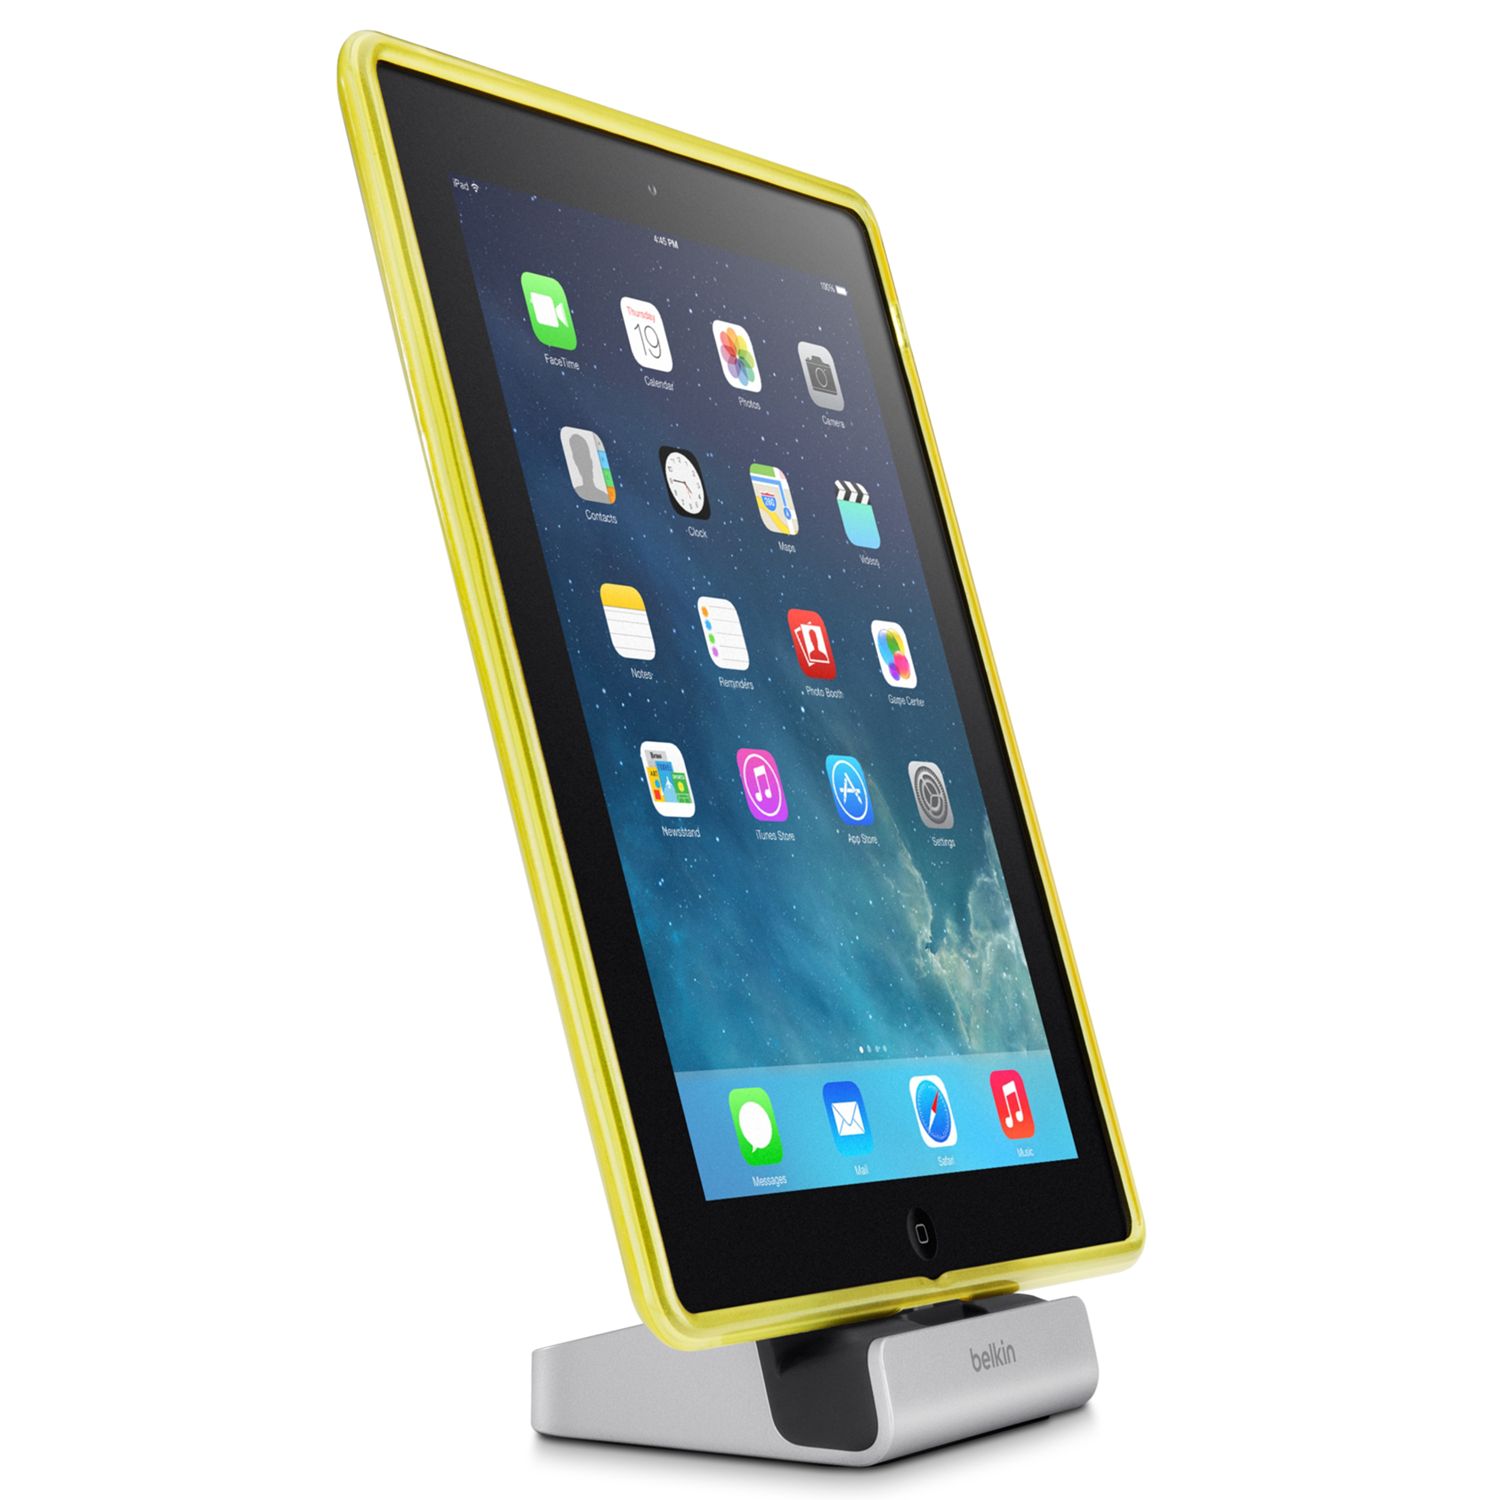 Belkin Express Lightning Dock with Built-in 4-foot USB Cable for iPad